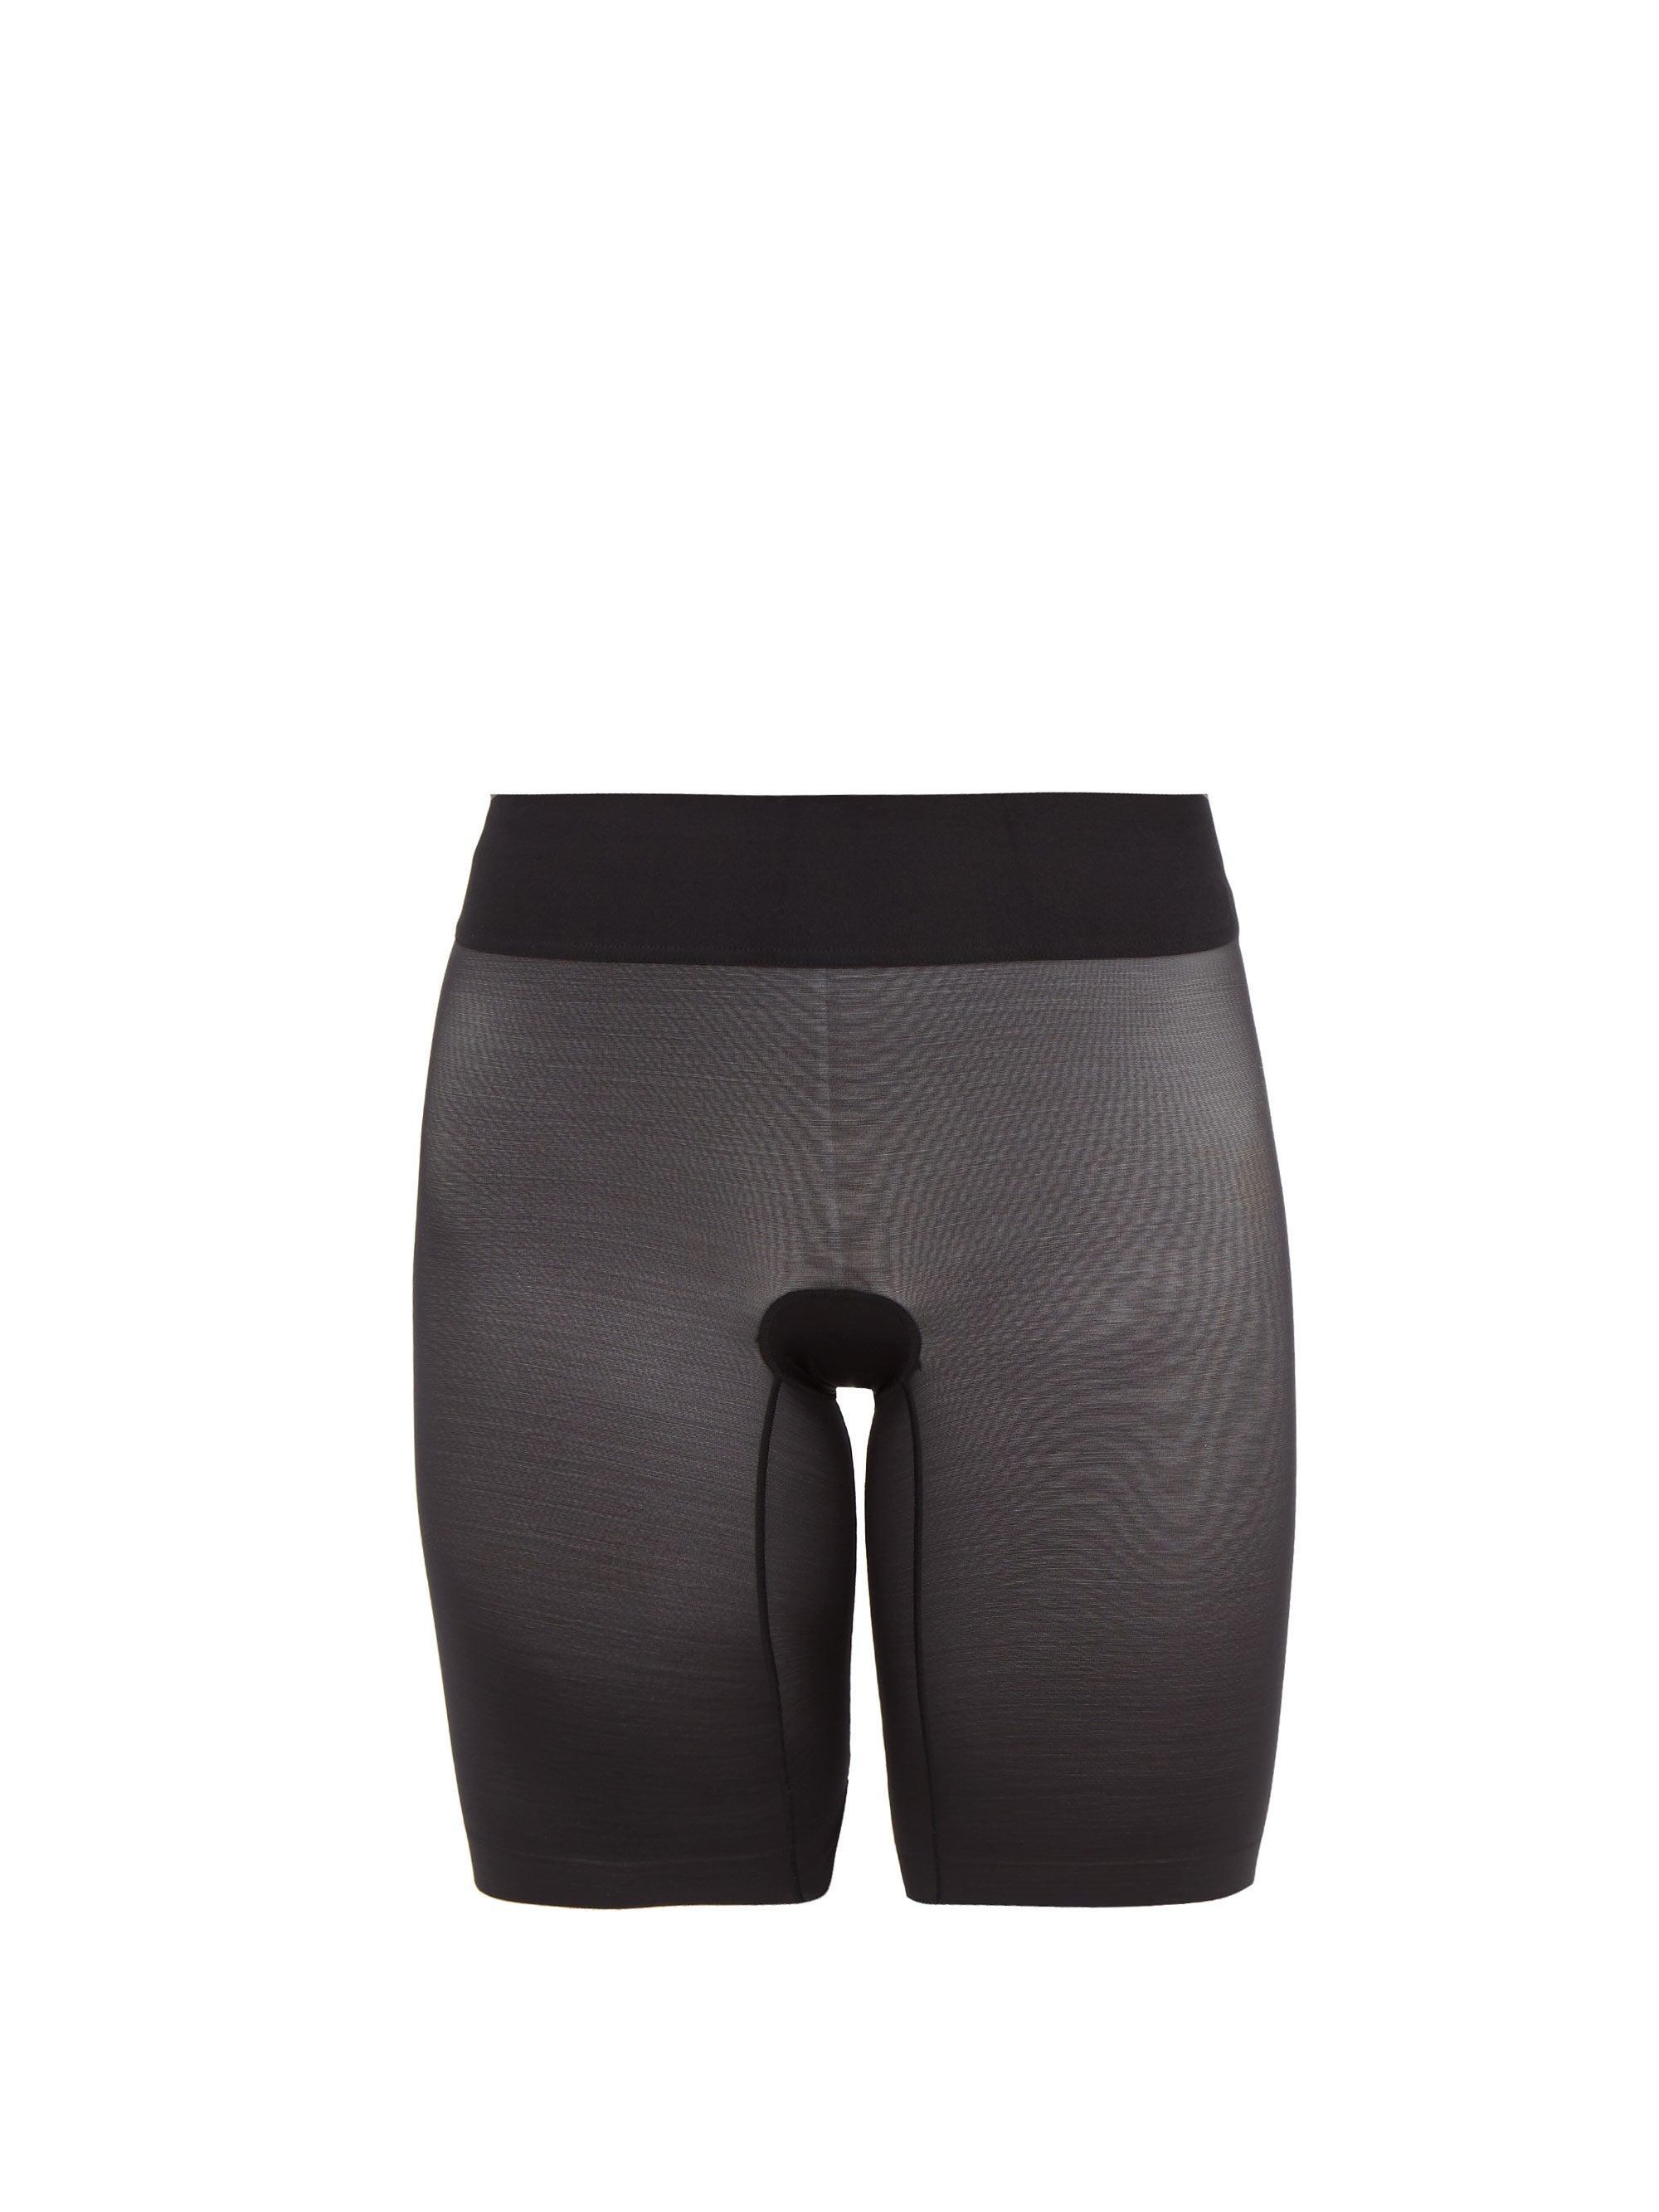 Wolford Sheer Touch Mesh Shapewear Shorts in Black   Lyst